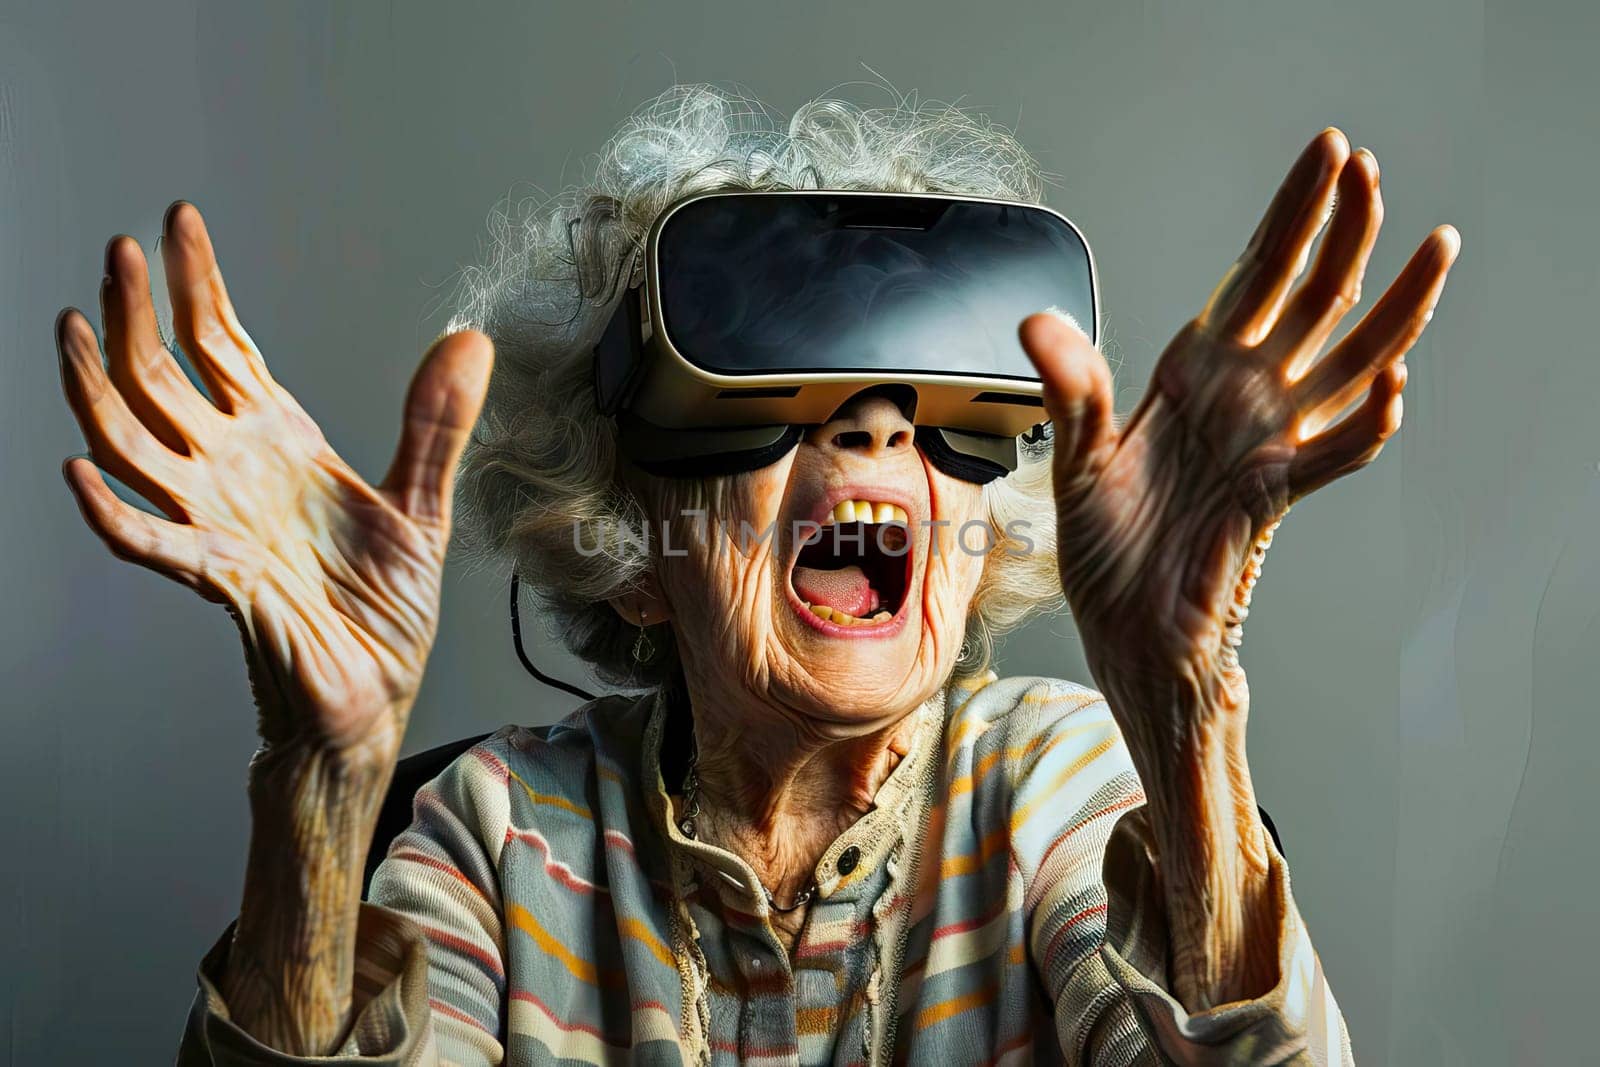 An elderly woman is actively engaging with virtual reality technology, expressing excitement or surprise. by vladimka